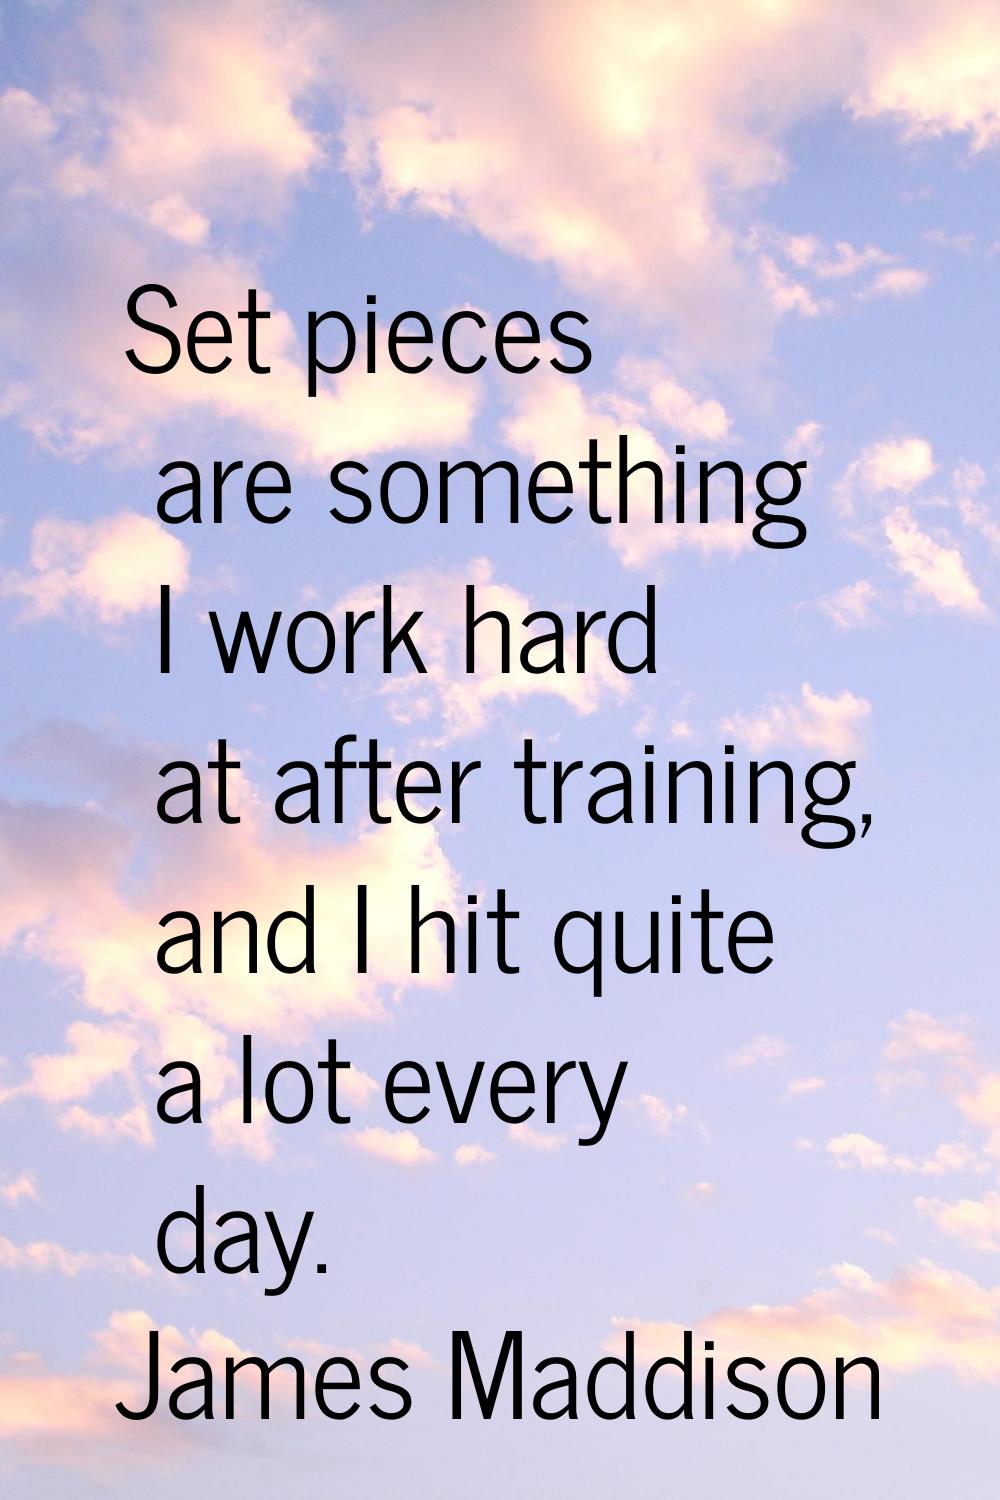 Set pieces are something I work hard at after training, and I hit quite a lot every day.